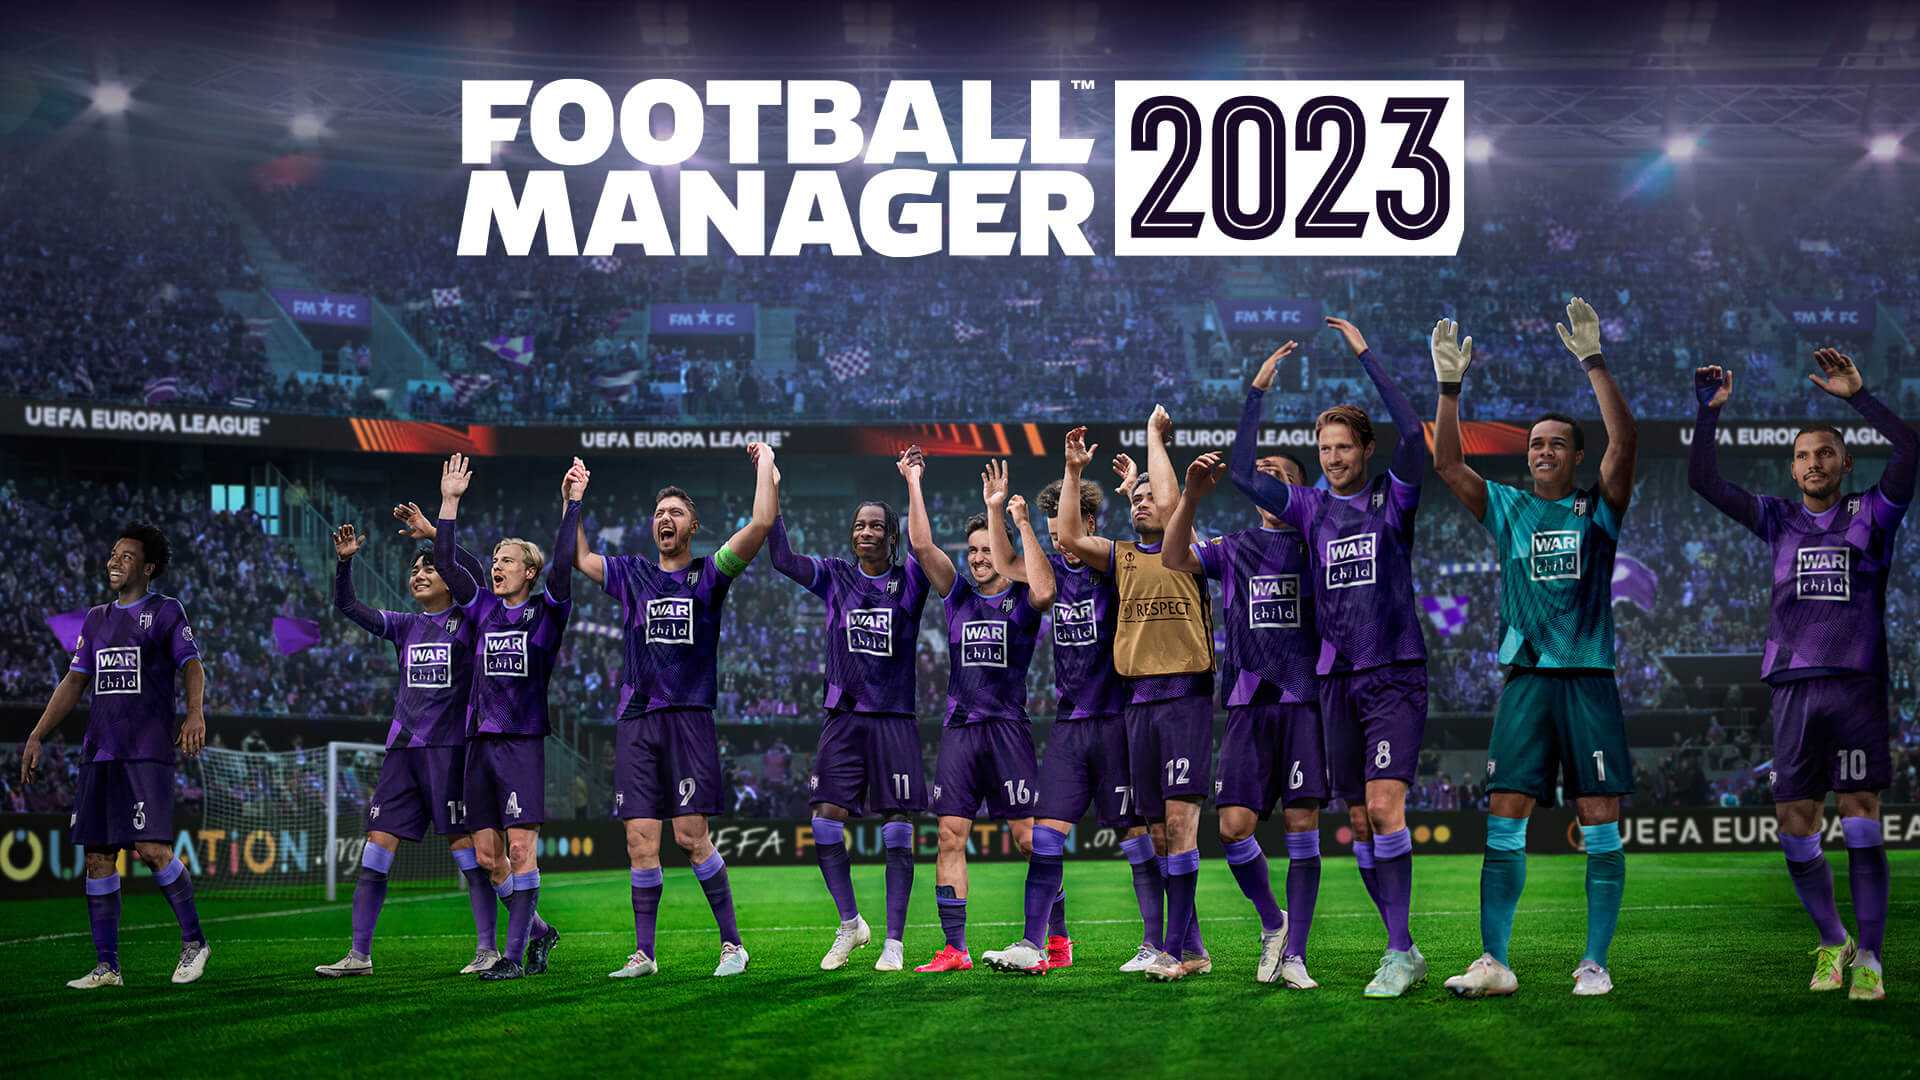 Football Manager 2023 Console will release on February 1st, 2023 for PS5